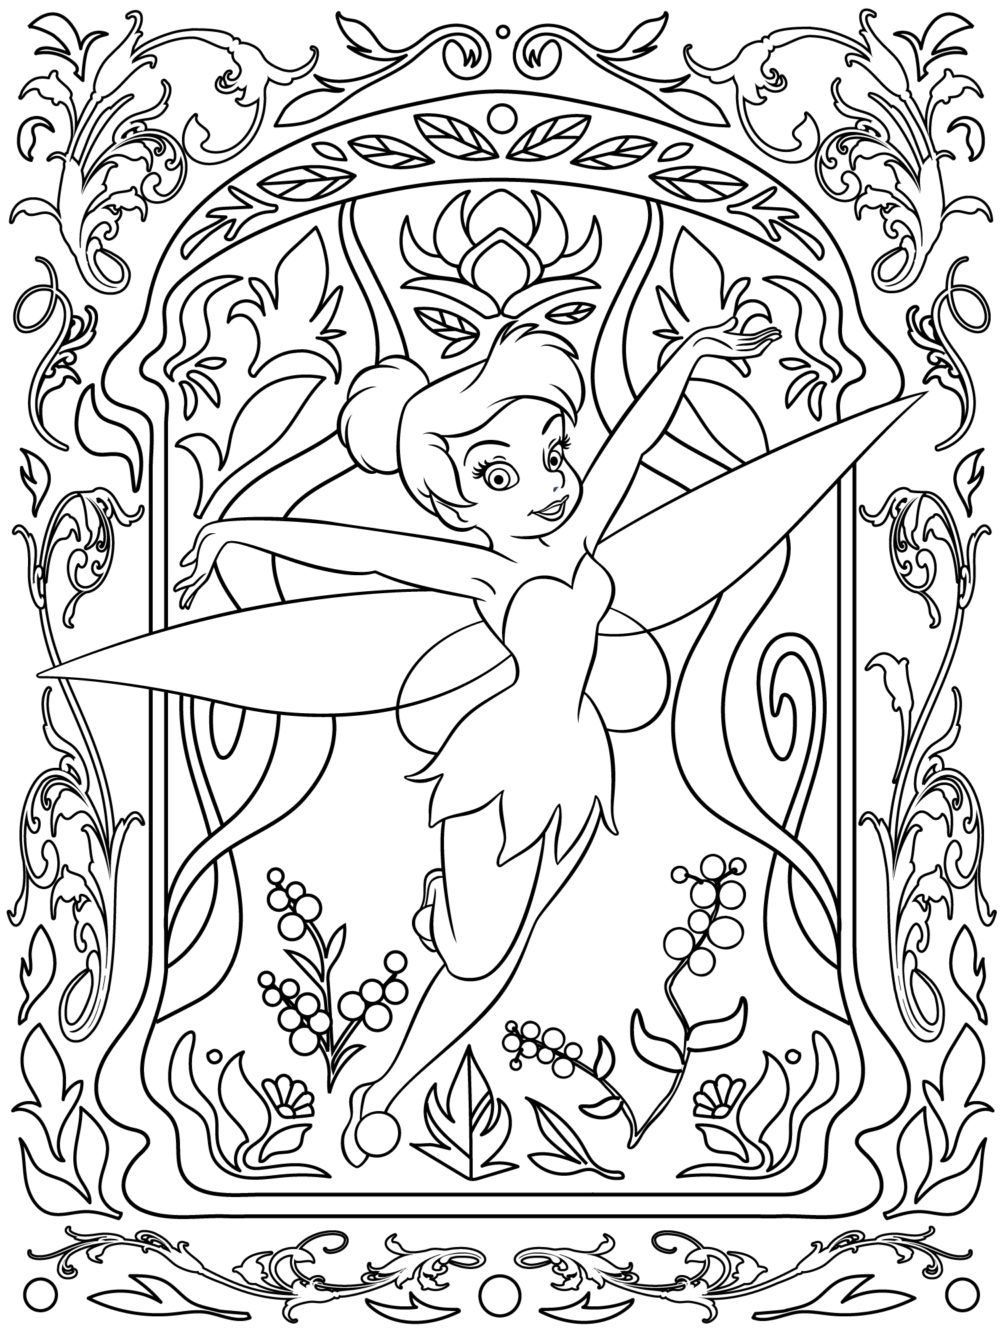 Adult Colouring Page #adultcolouring | Disney Coloring Pages - Free Printable Disney Coloring Pages